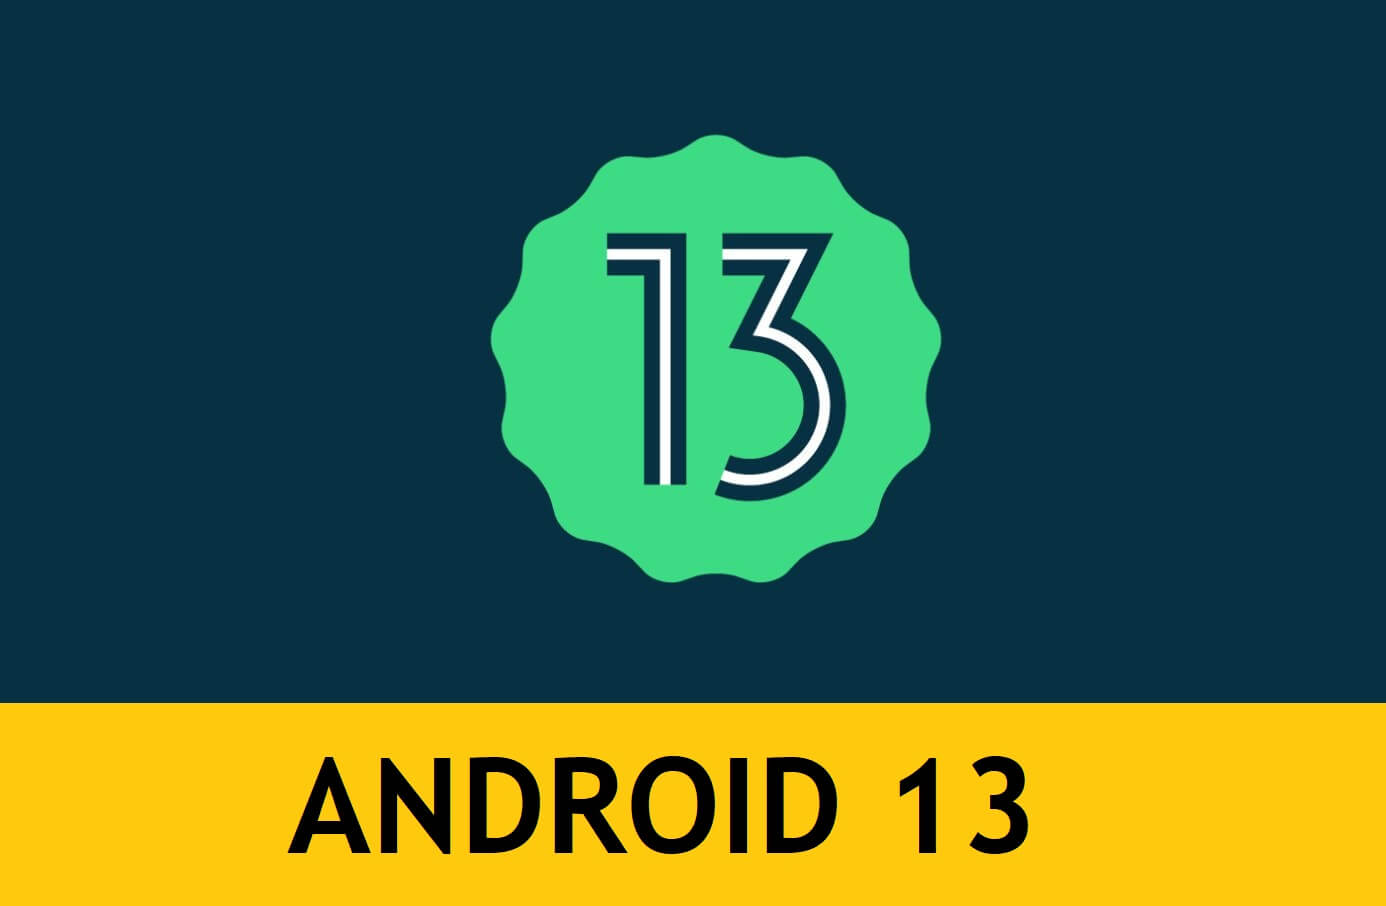 Samsung Android 13 (One UI 5.0) Update List: Which Samsung Galaxy devices will be eligible